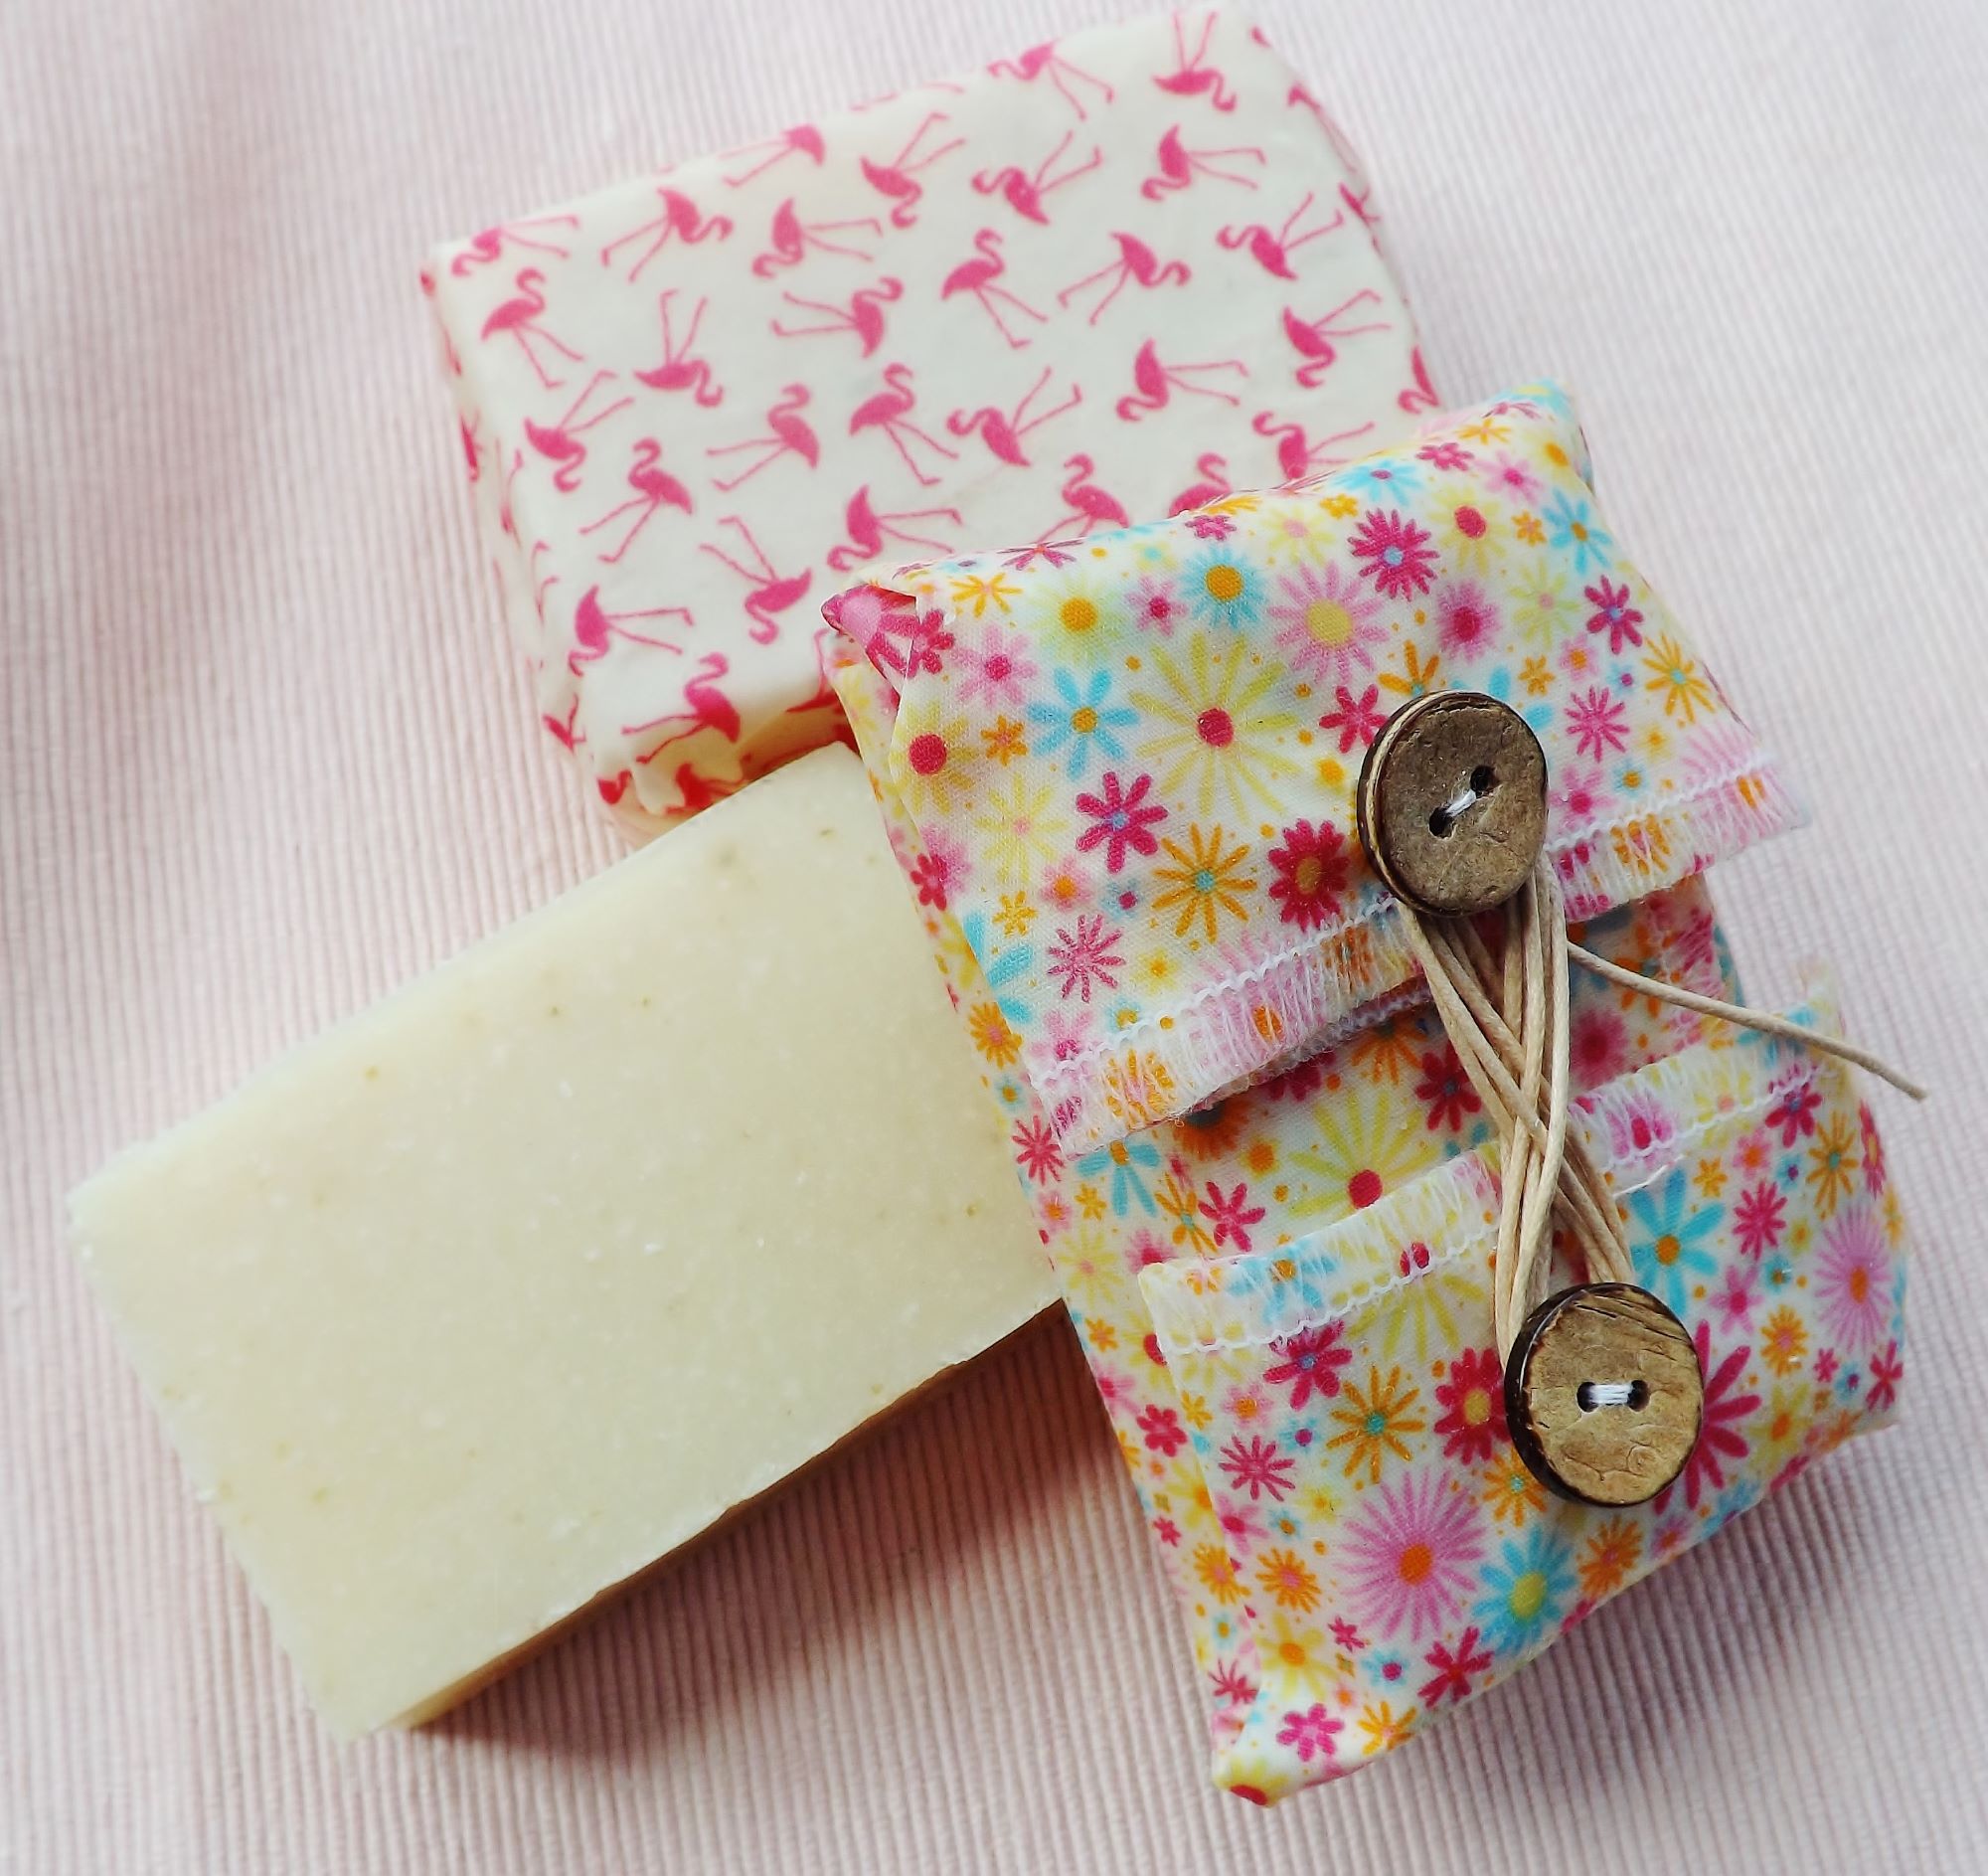 V-Eco Pamper Packsâ„¢,  SoapSaverâ„¢ - 2 soap bars wrapped in a floral waxed  wrap which is secured with coconut buttons and cotton cord